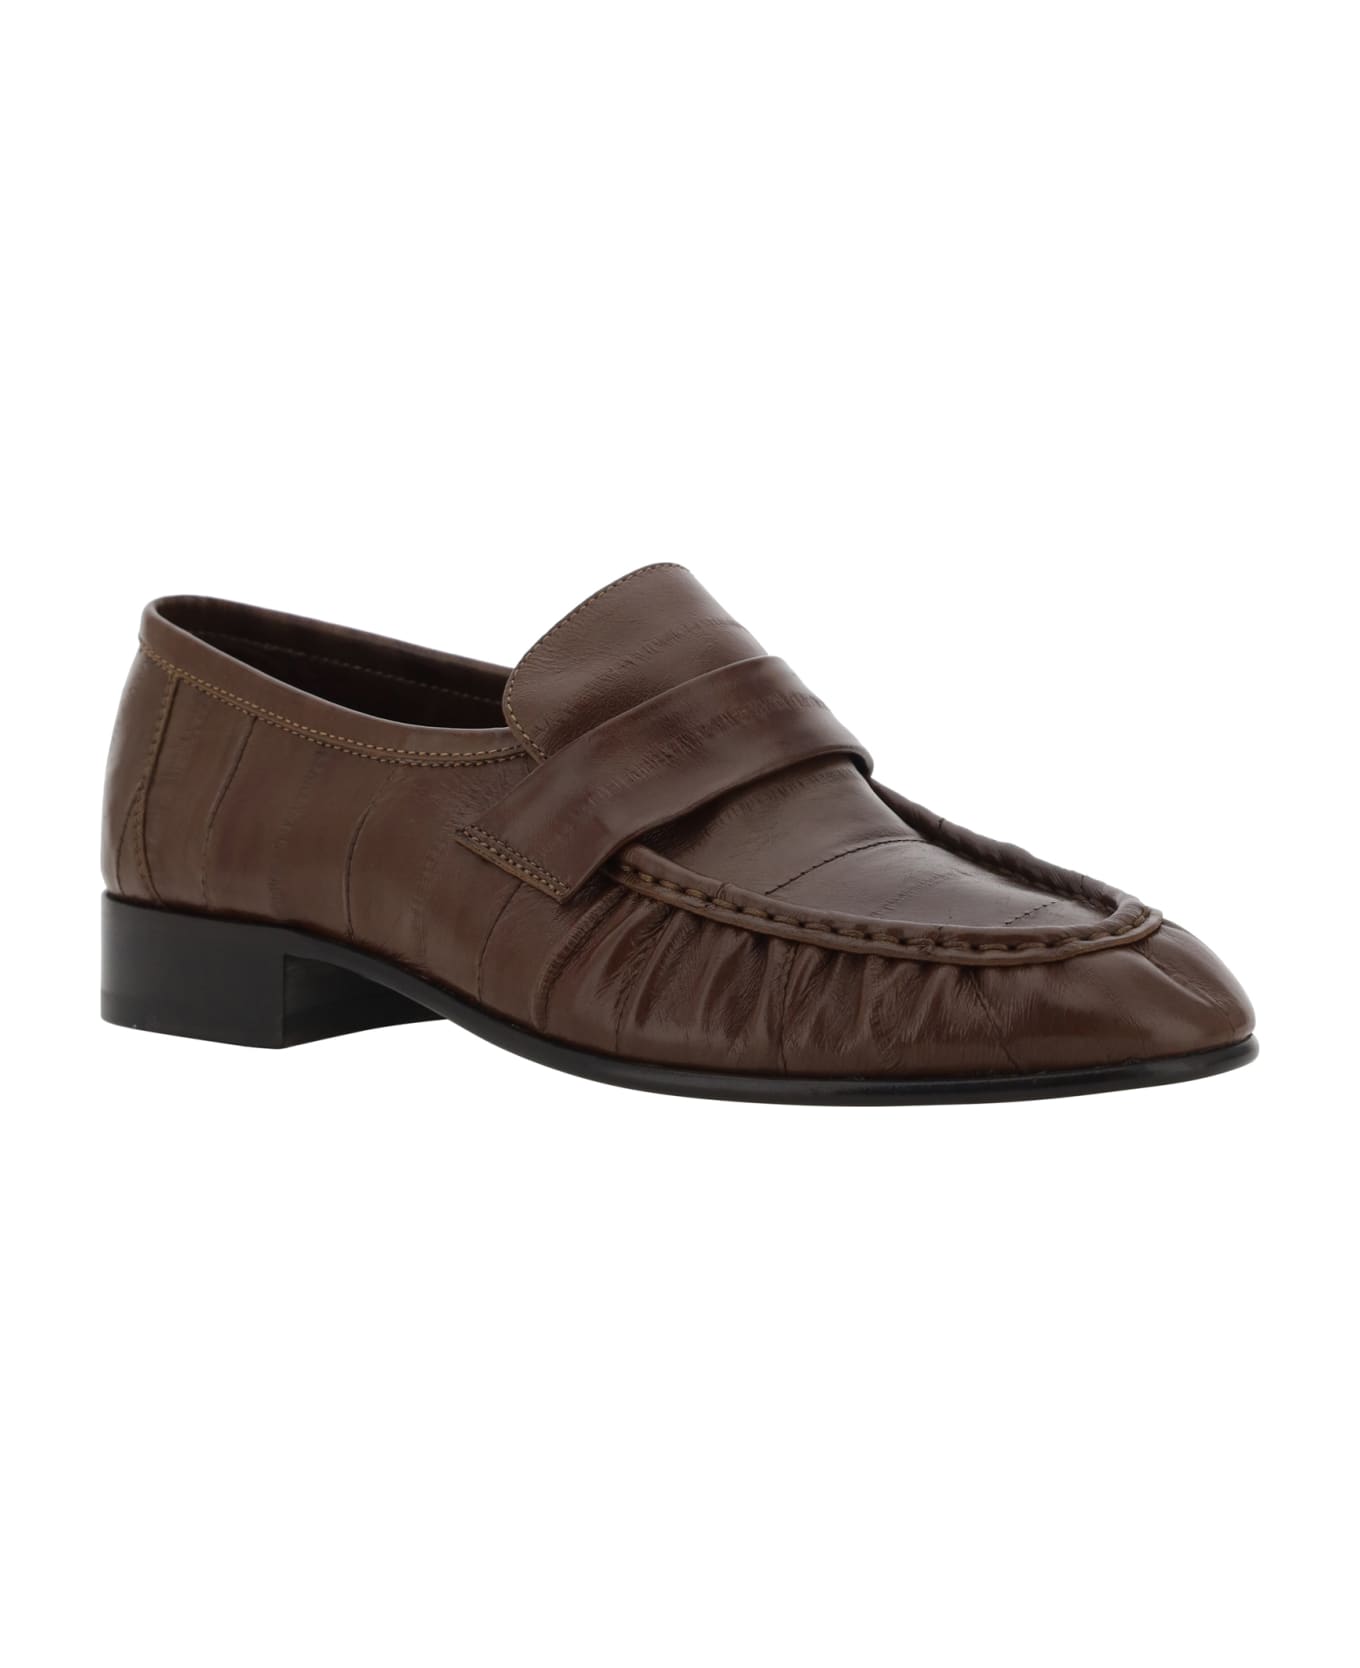 The Row Soft Loafers - Light Brown フラットシューズ